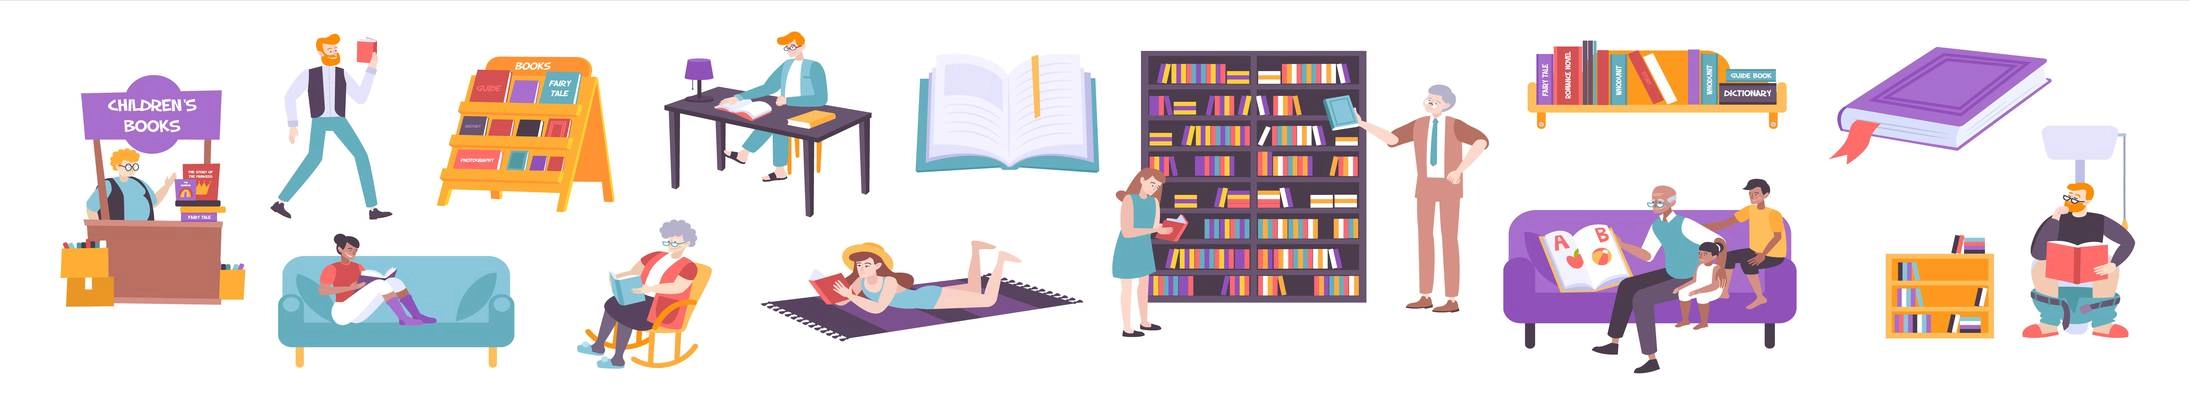 Book people set of flat icons with images of bookcases bookfair stalls and reading people characters vector illustration